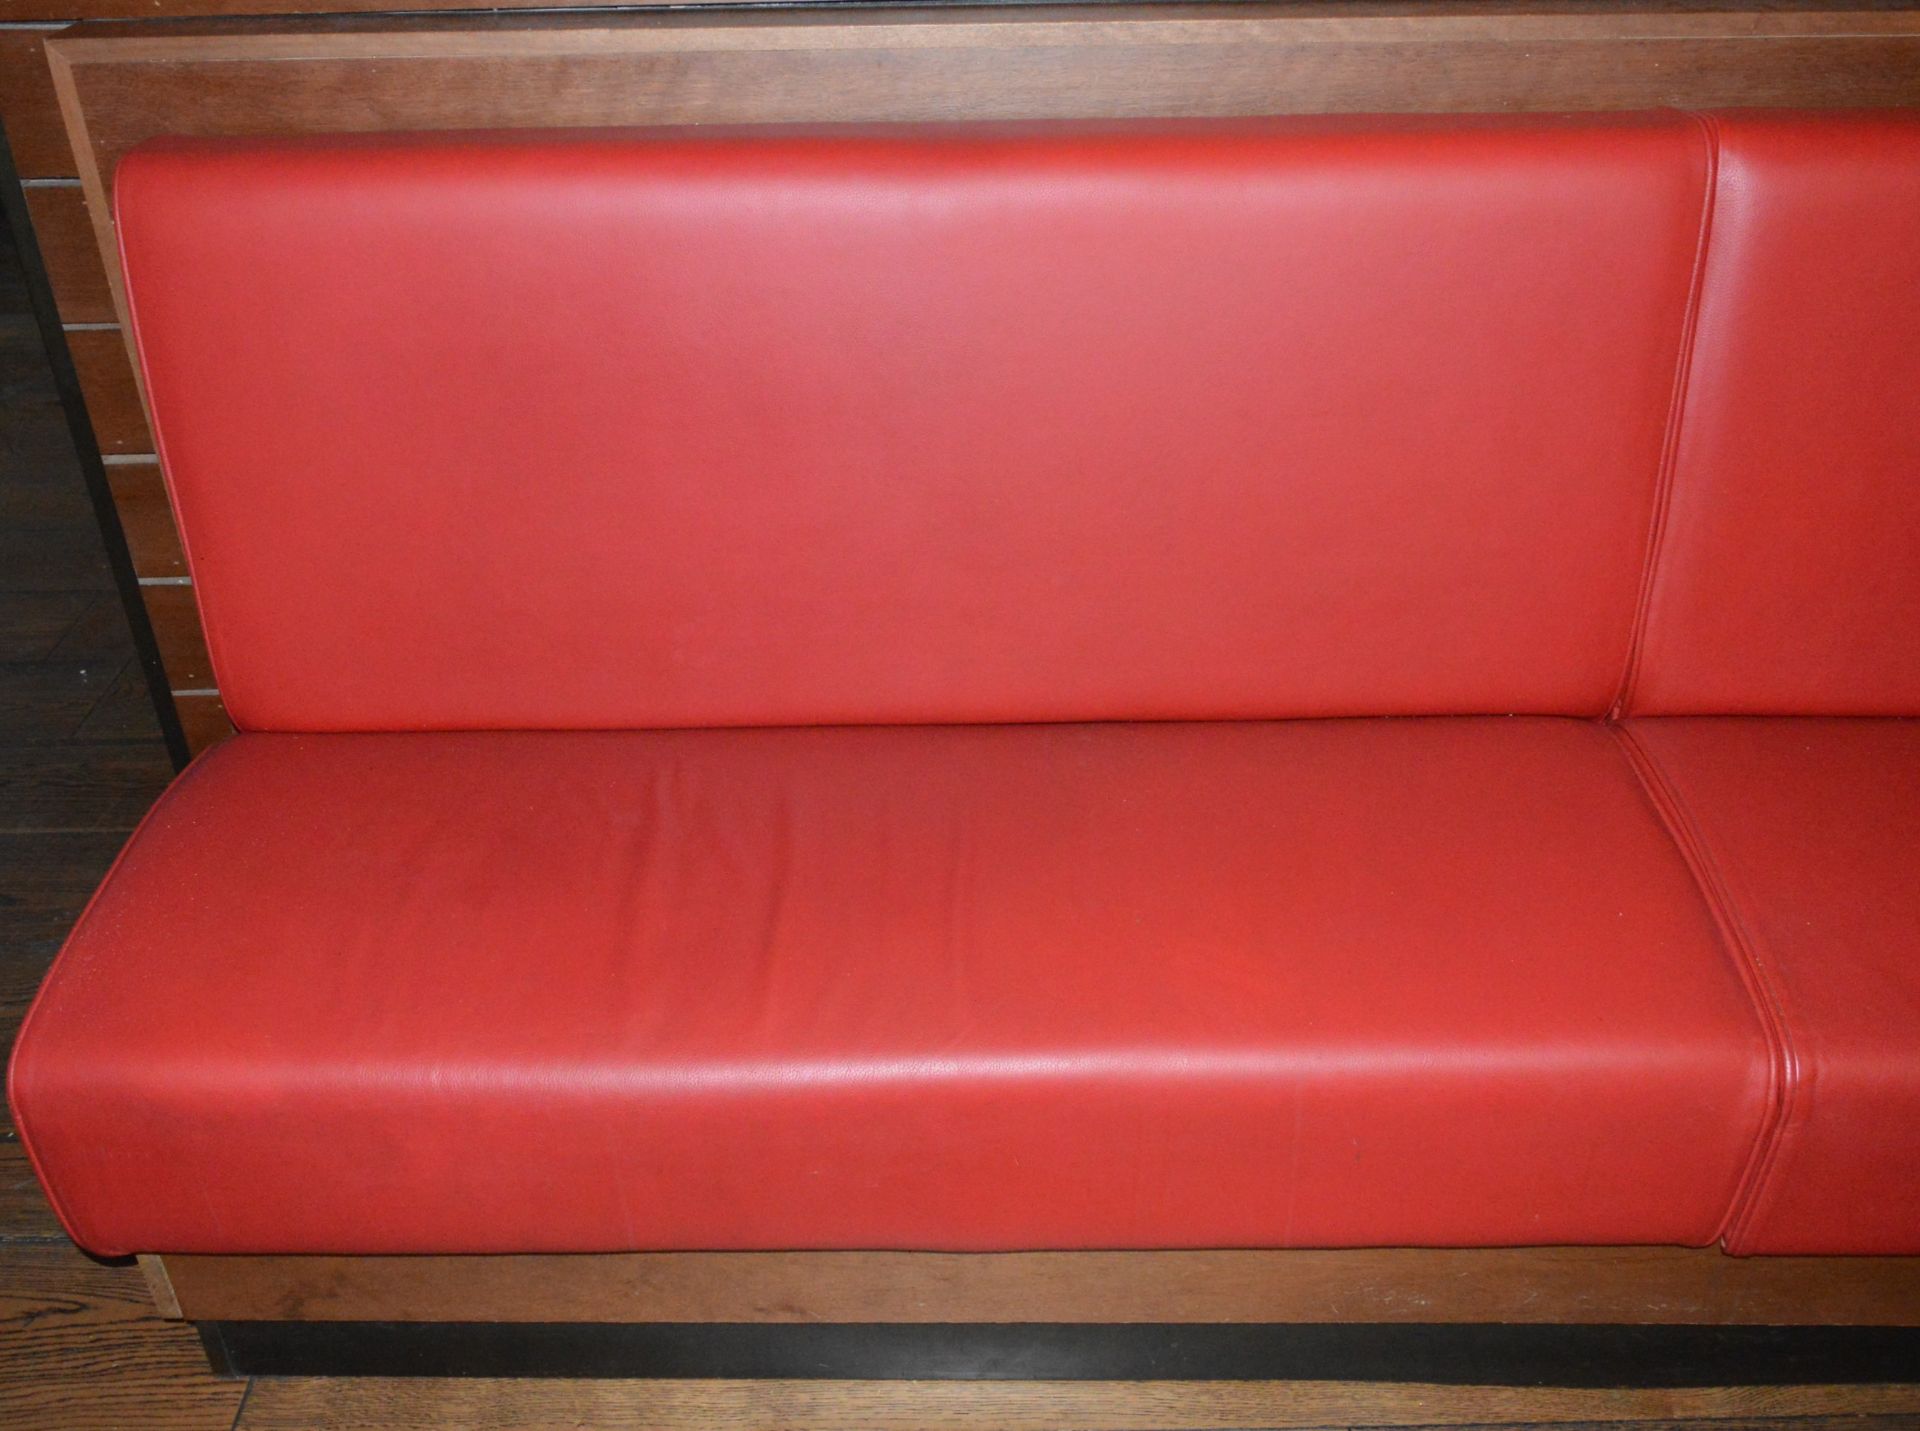 1 x High Back Seating Bench Upholstered in Red Leather With Oak Base and Surround - Image 4 of 5